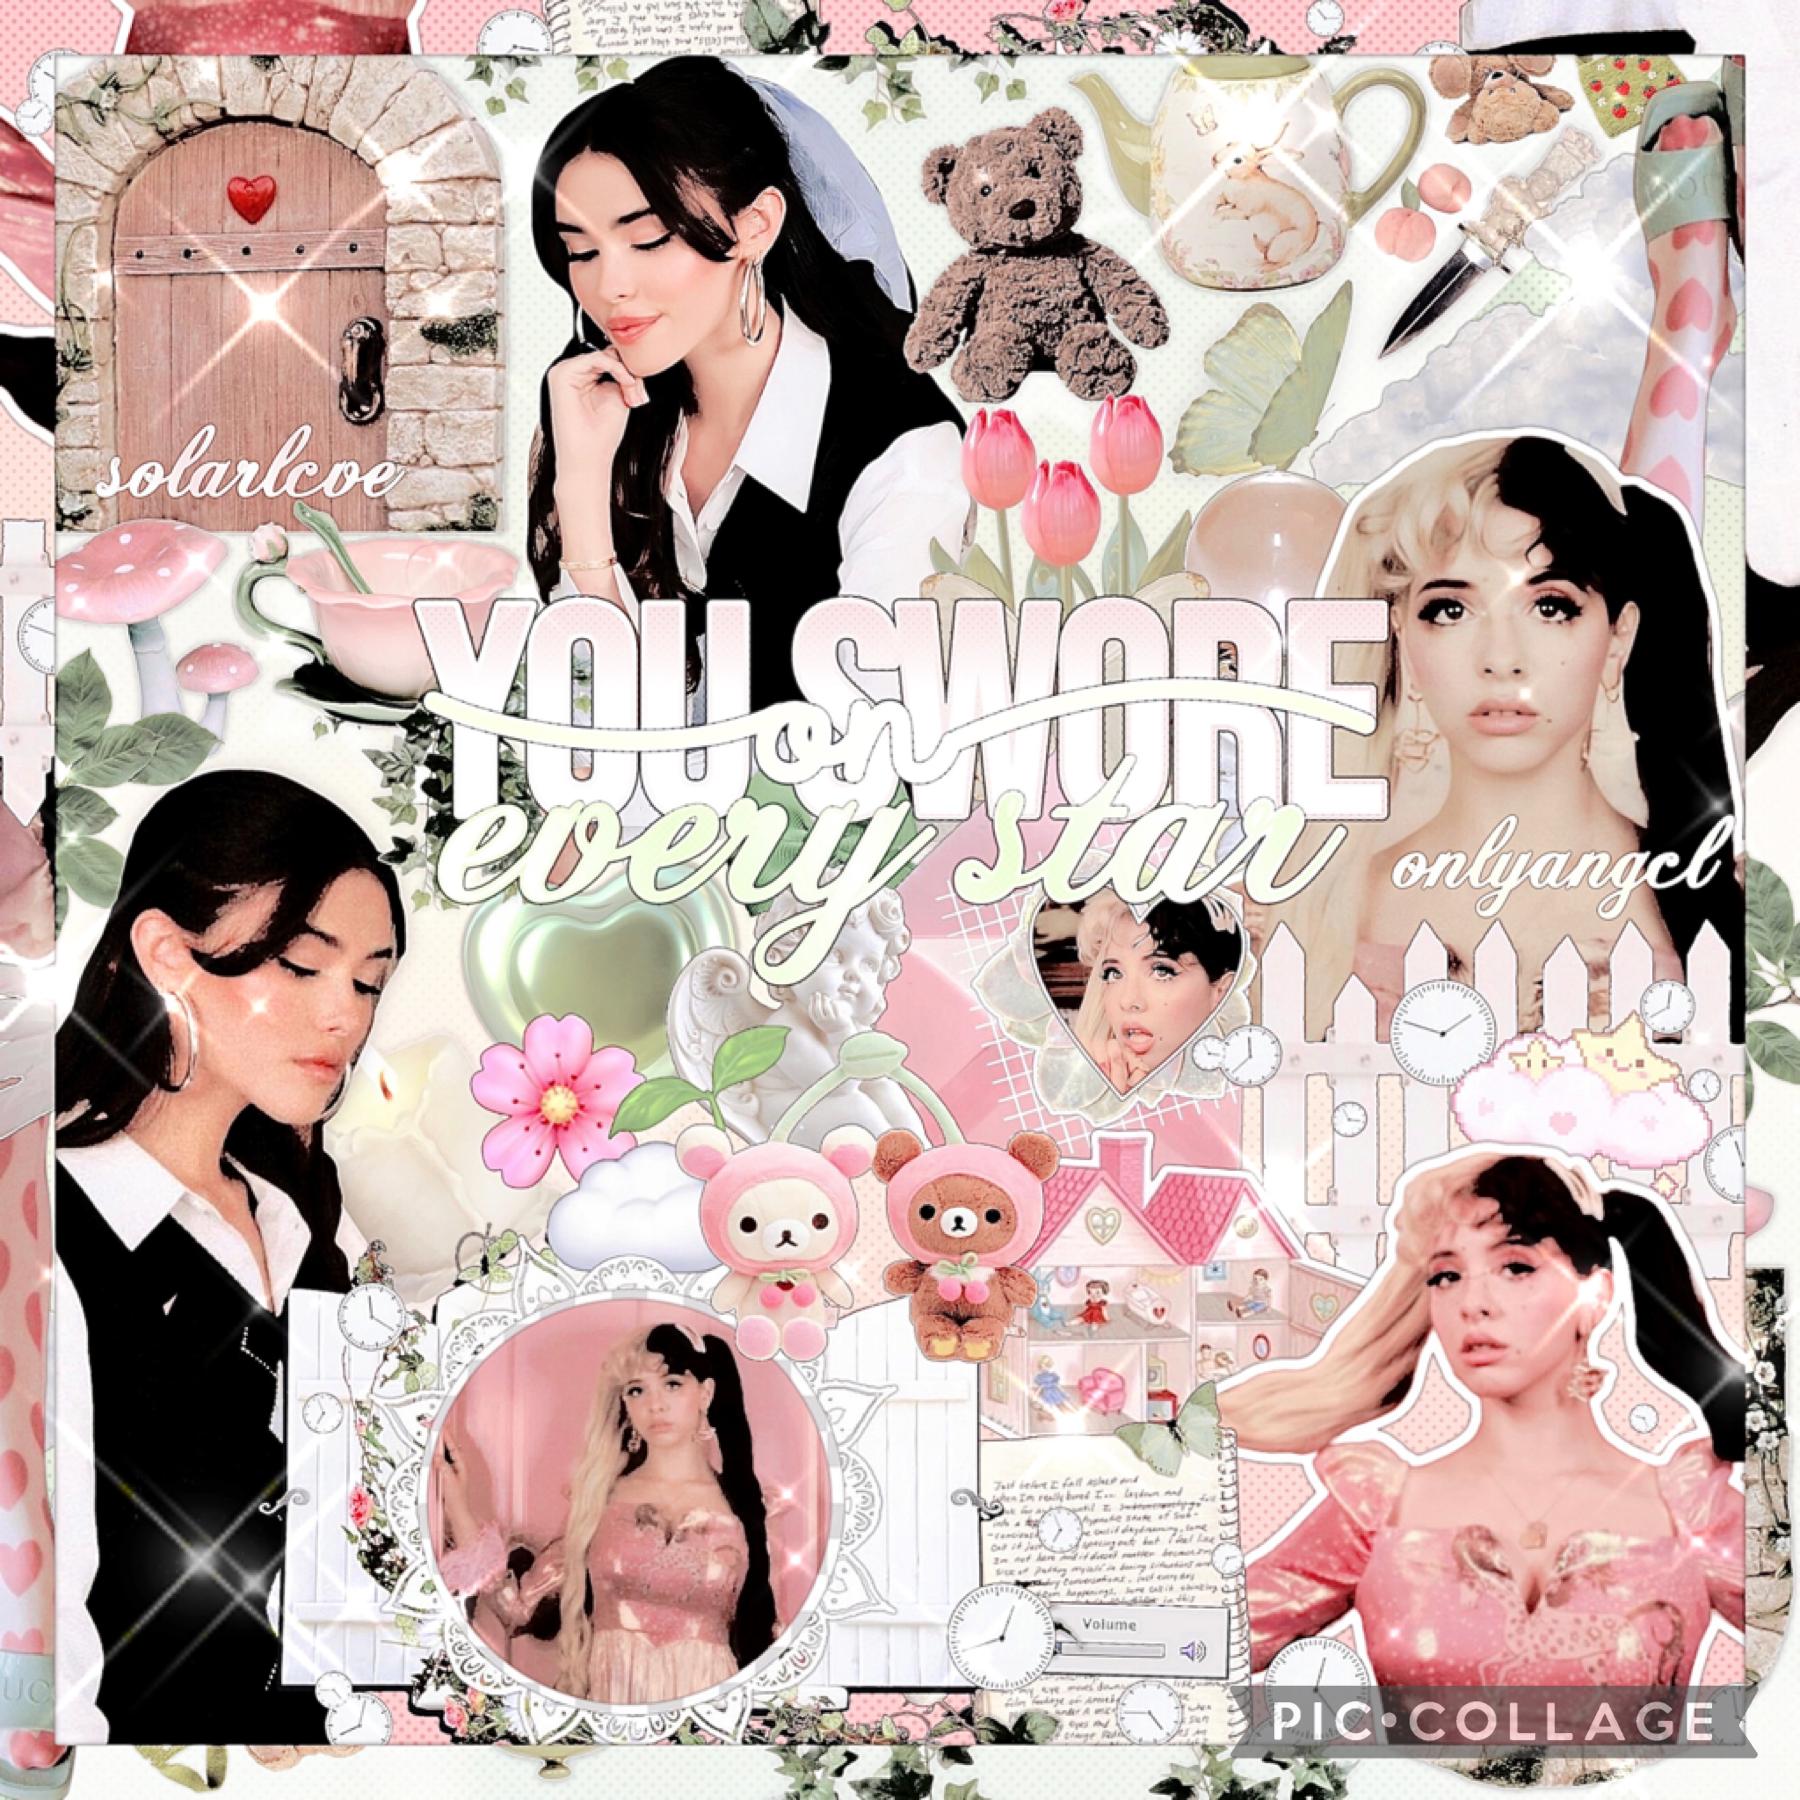 (๑•͈ᴗ•͈) tap here !! 🍥☆🐰

hi babies, @solarlcve and i finally
collabed after wanting to for so long!!
she slayed ofc <3 ++
we miss pc :’(